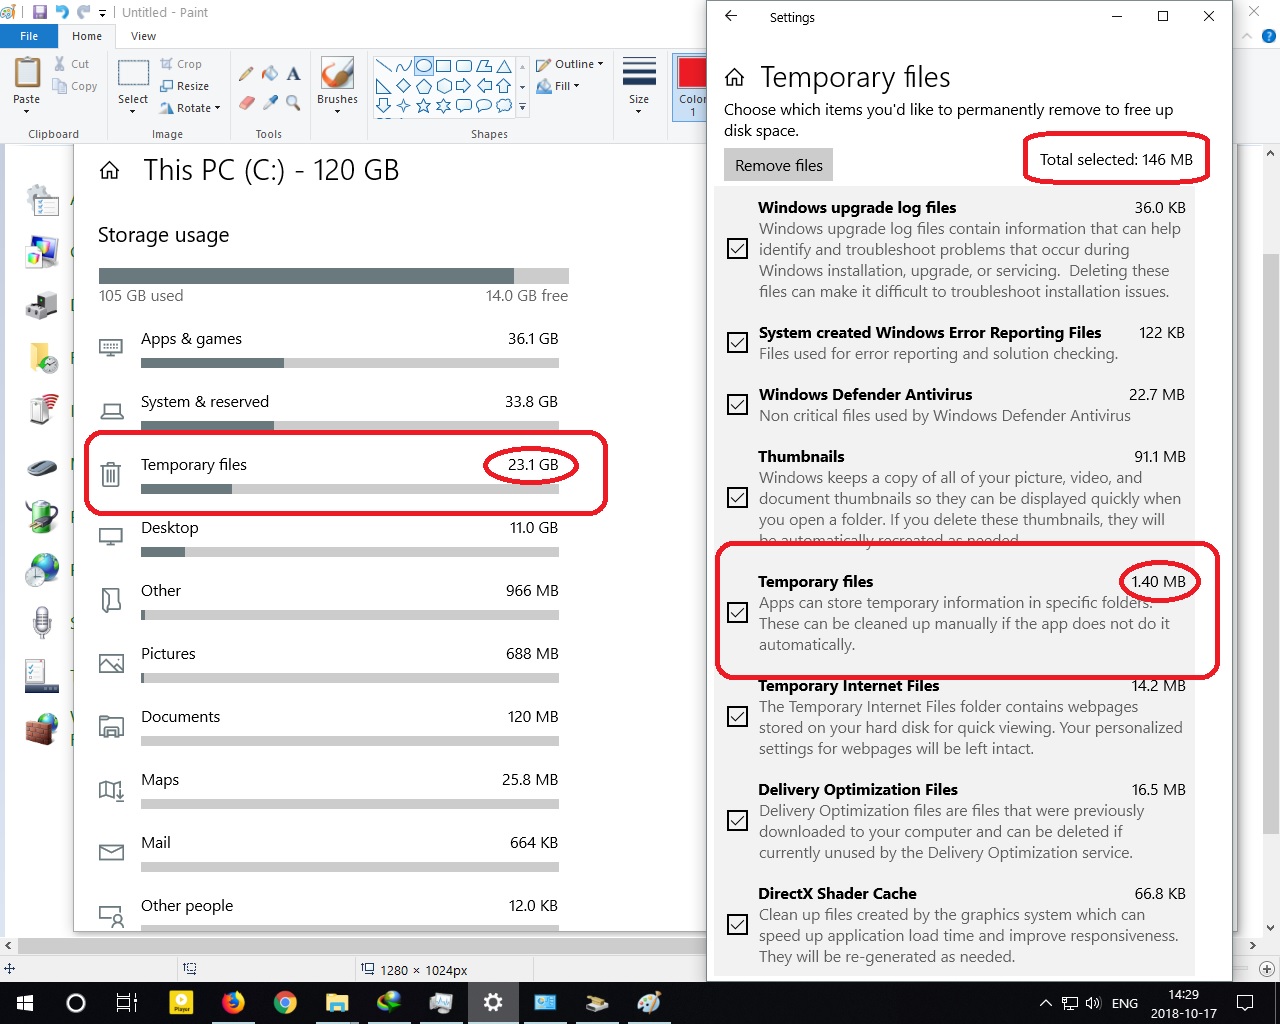 Multiple Amount of Temporary Files Size in Windows 10 159d0a45-19b3-4146-a791-0bf7ec696e05?upload=true.jpg